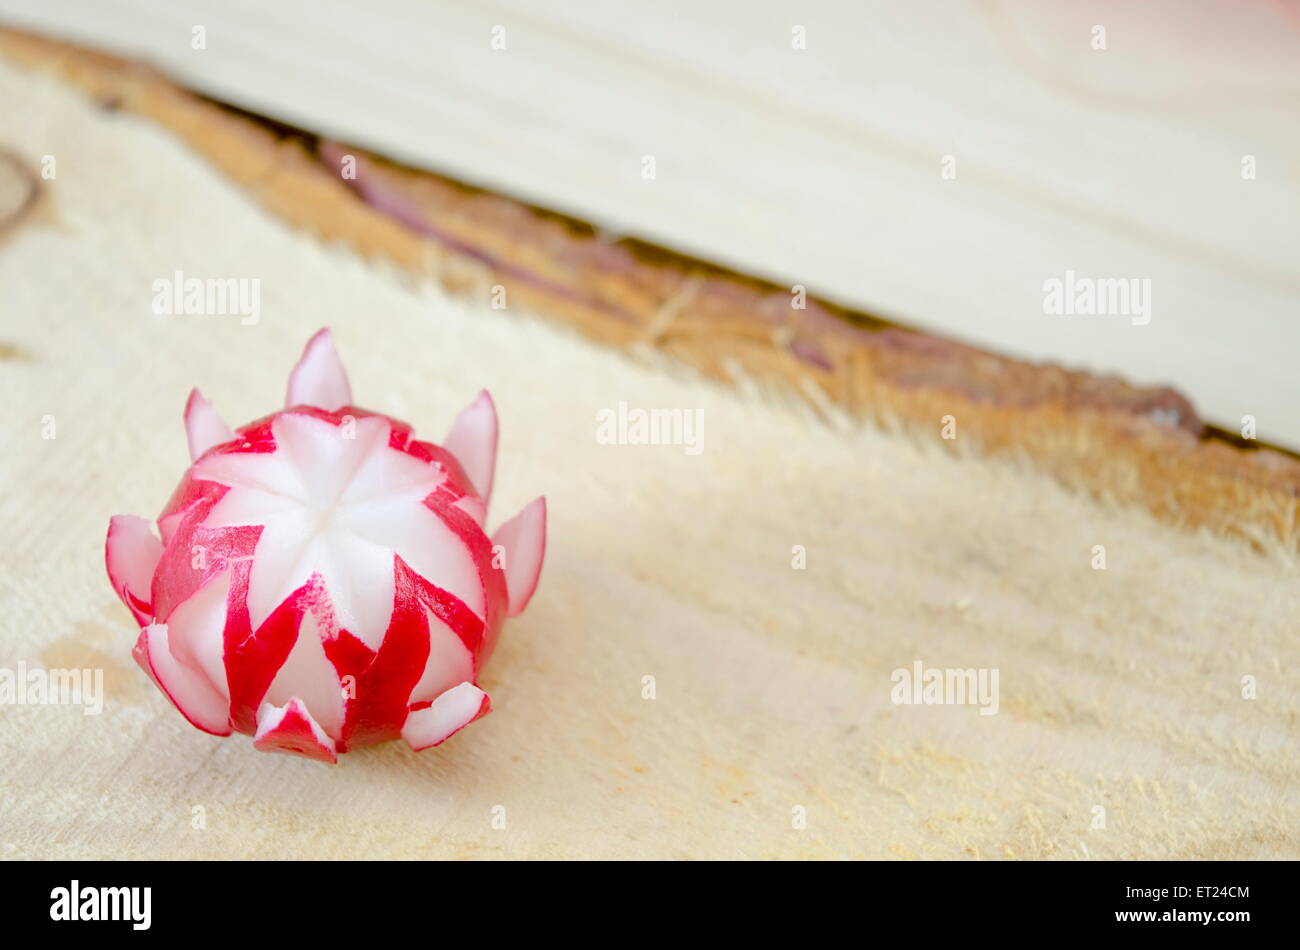 Decorated red radish on a rough wooden surface Stock Photo